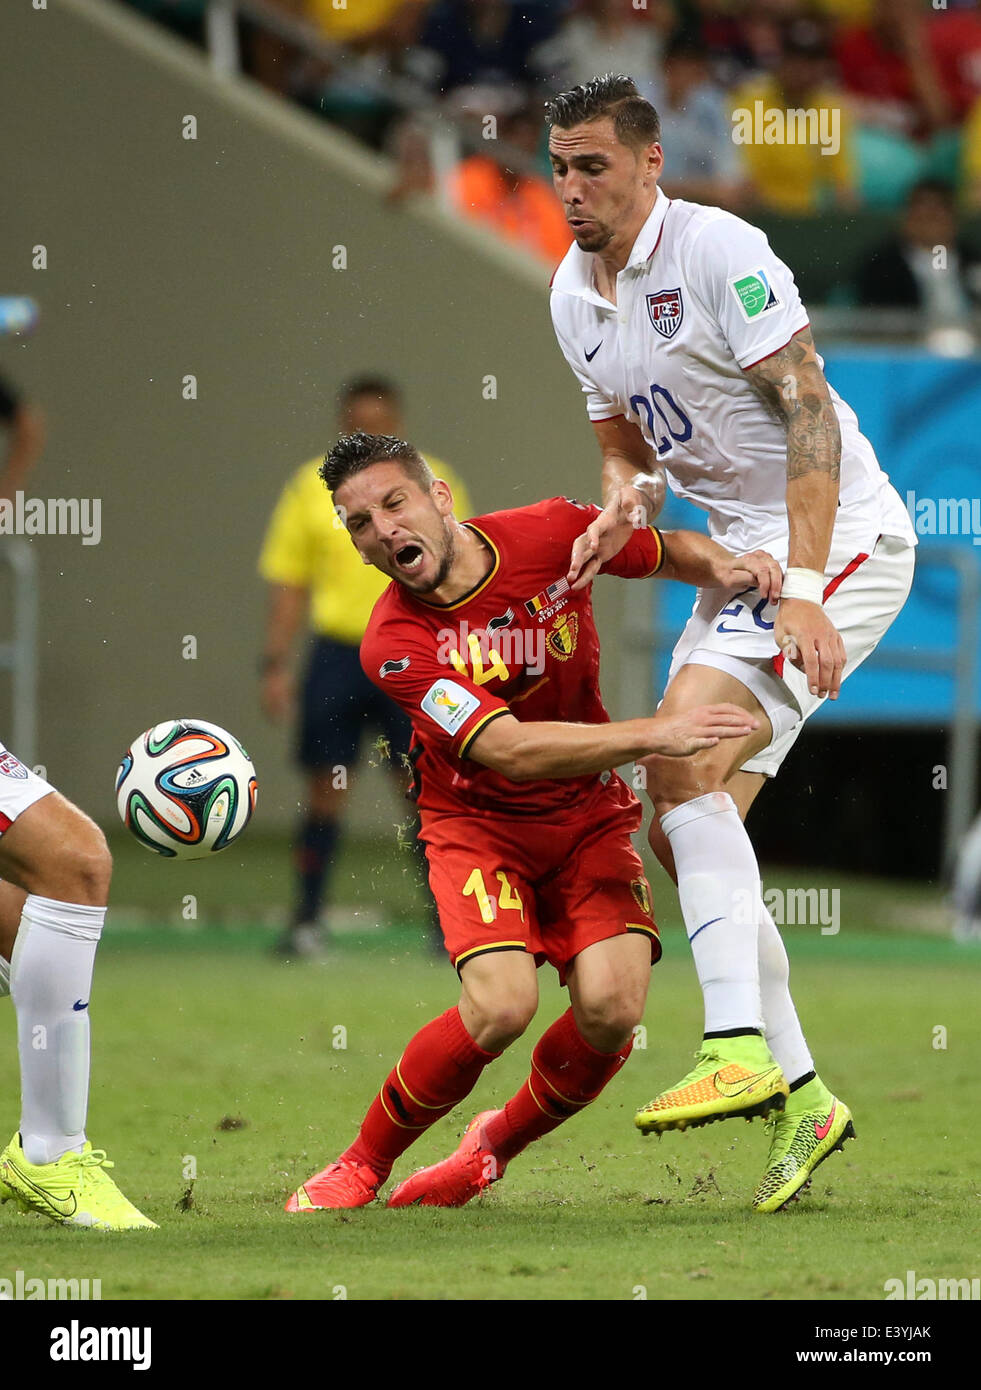 Salvador, Brazil. 1st July, 2014. Belgium's Dries Mertens vies with Geoff Cameron of the U.S. during a Round of 16 match between Belgium and the U.S. of 2014 FIFA World Cup at the Arena Fonte Nova Stadium in Salvador, Brazil, on July 1, 2014. Belgium won 2-1 over the U.S. after 120 minutes and qualified for quarter-finals on Tuesday. Credit:  Cao Can/Xinhua/Alamy Live News Stock Photo